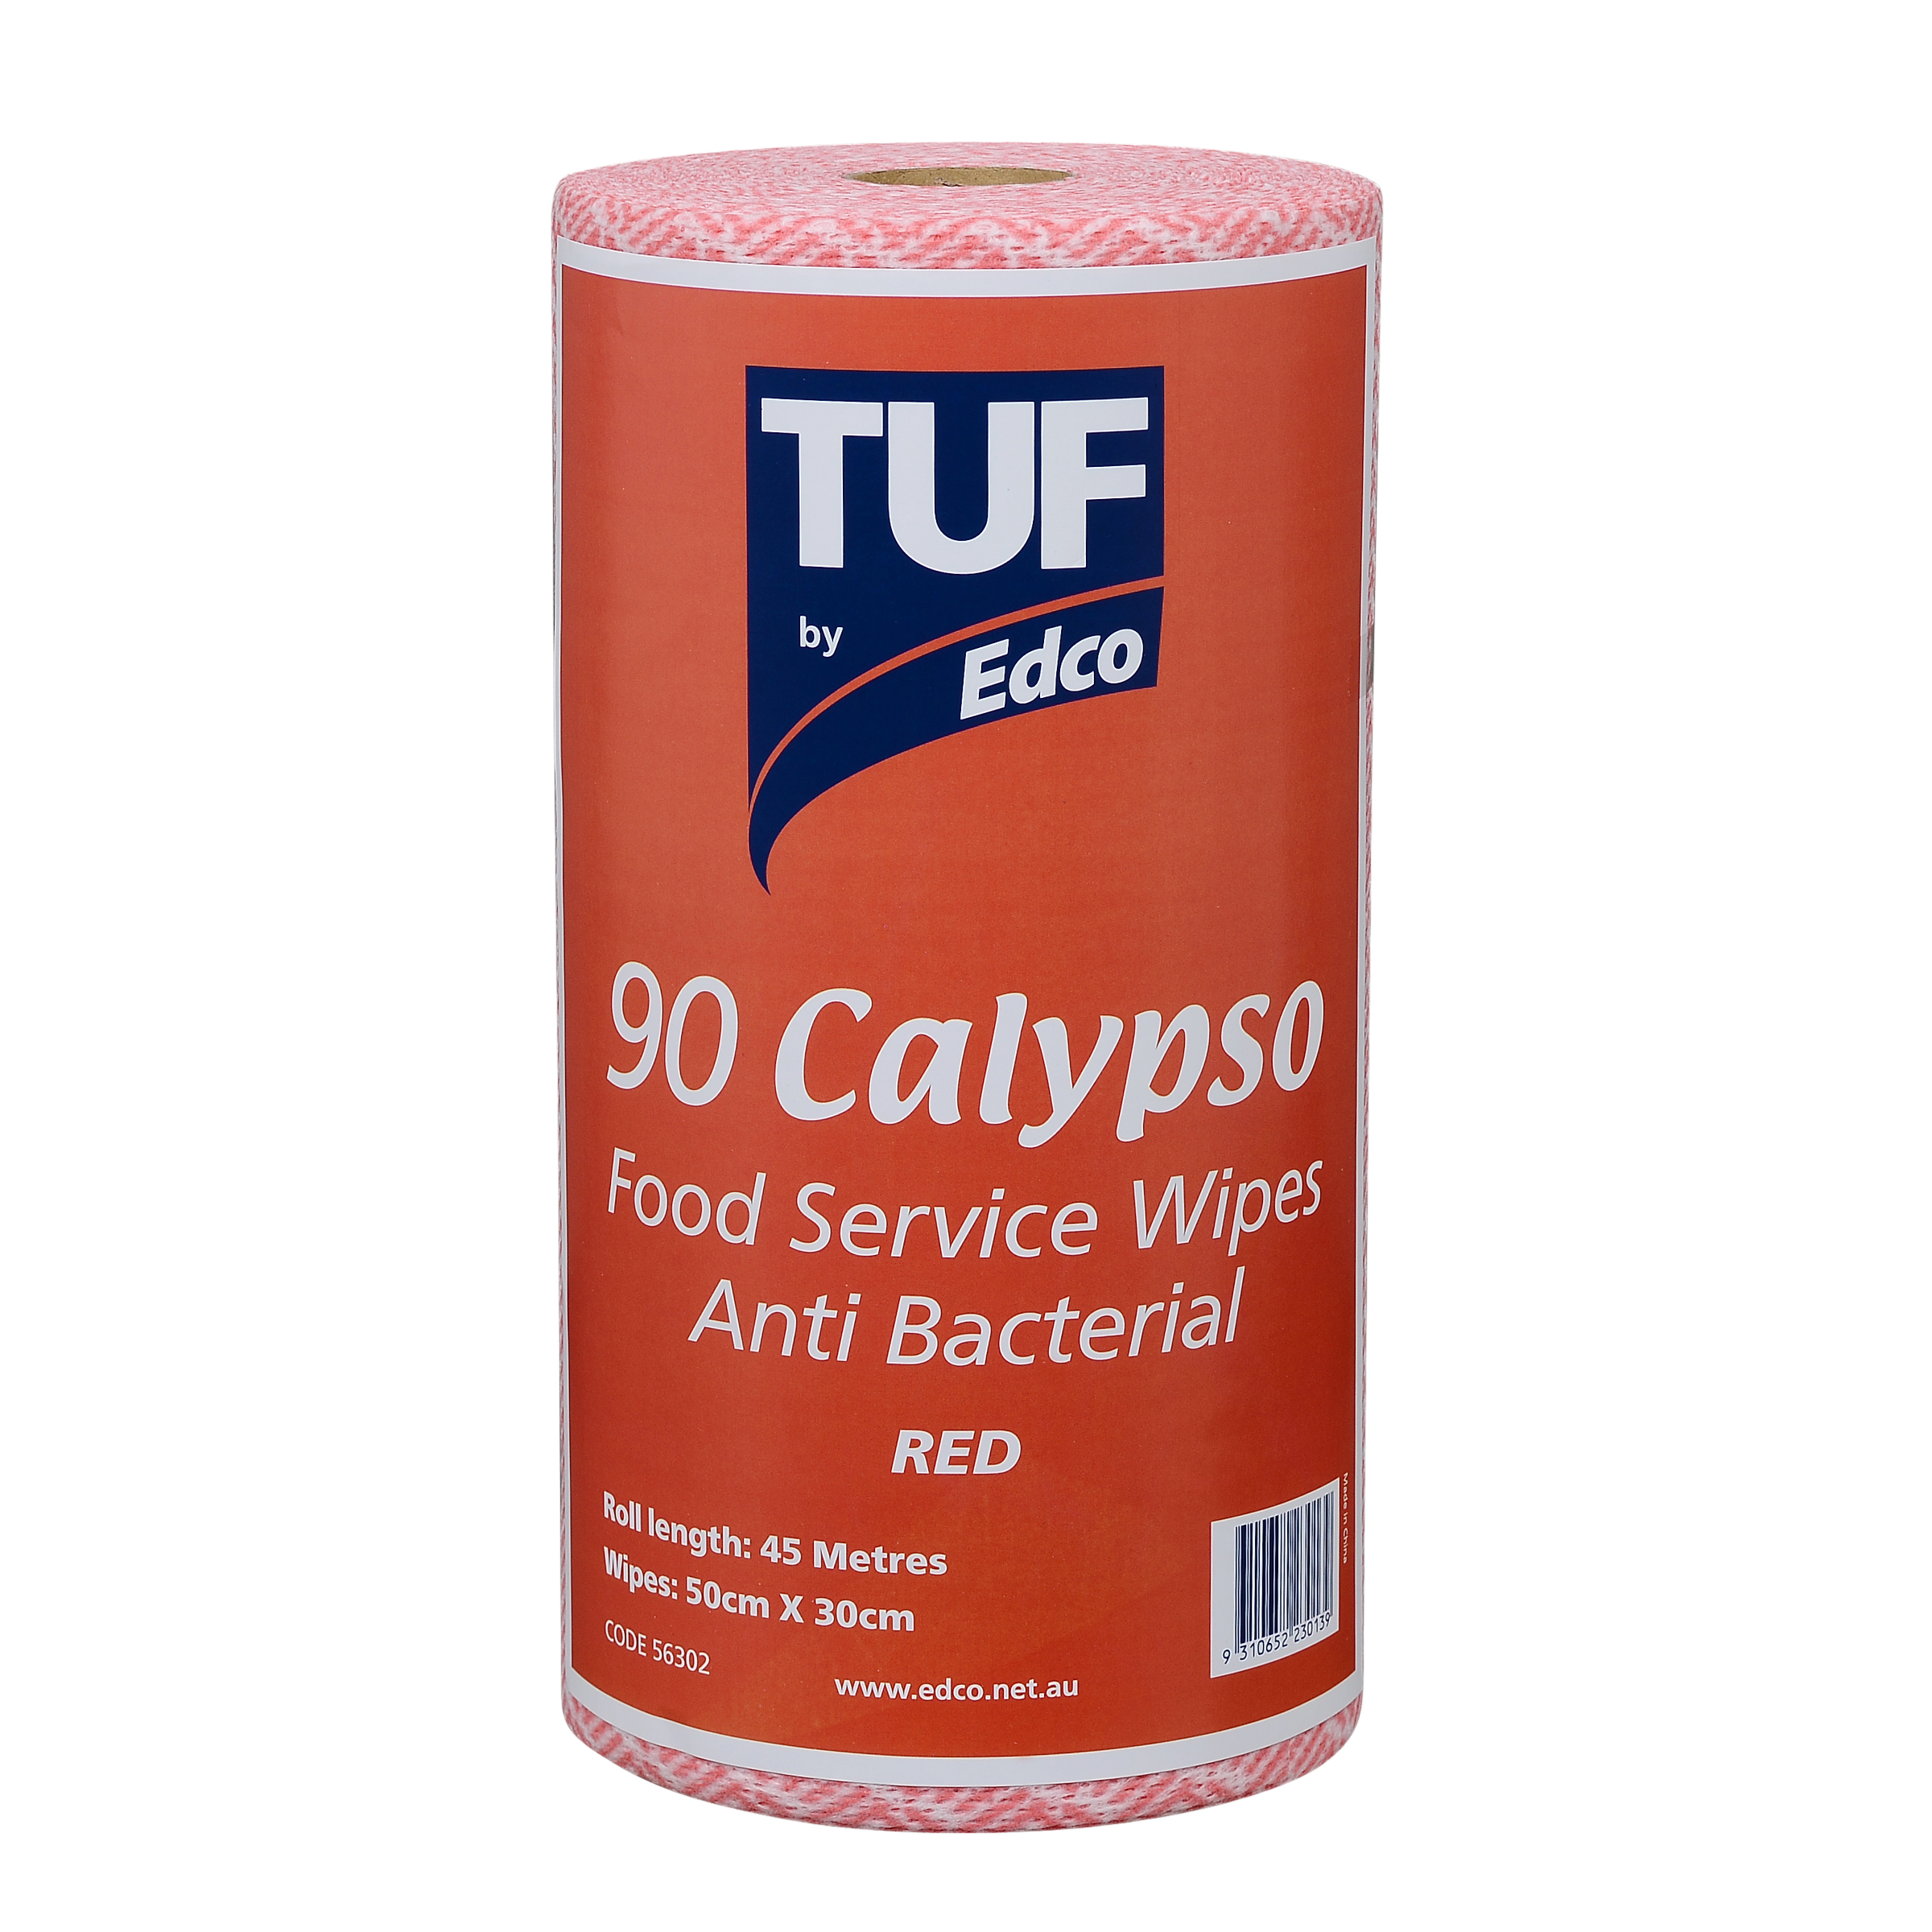 56302 Tuf by Edco Calypso Wipes – Red IP